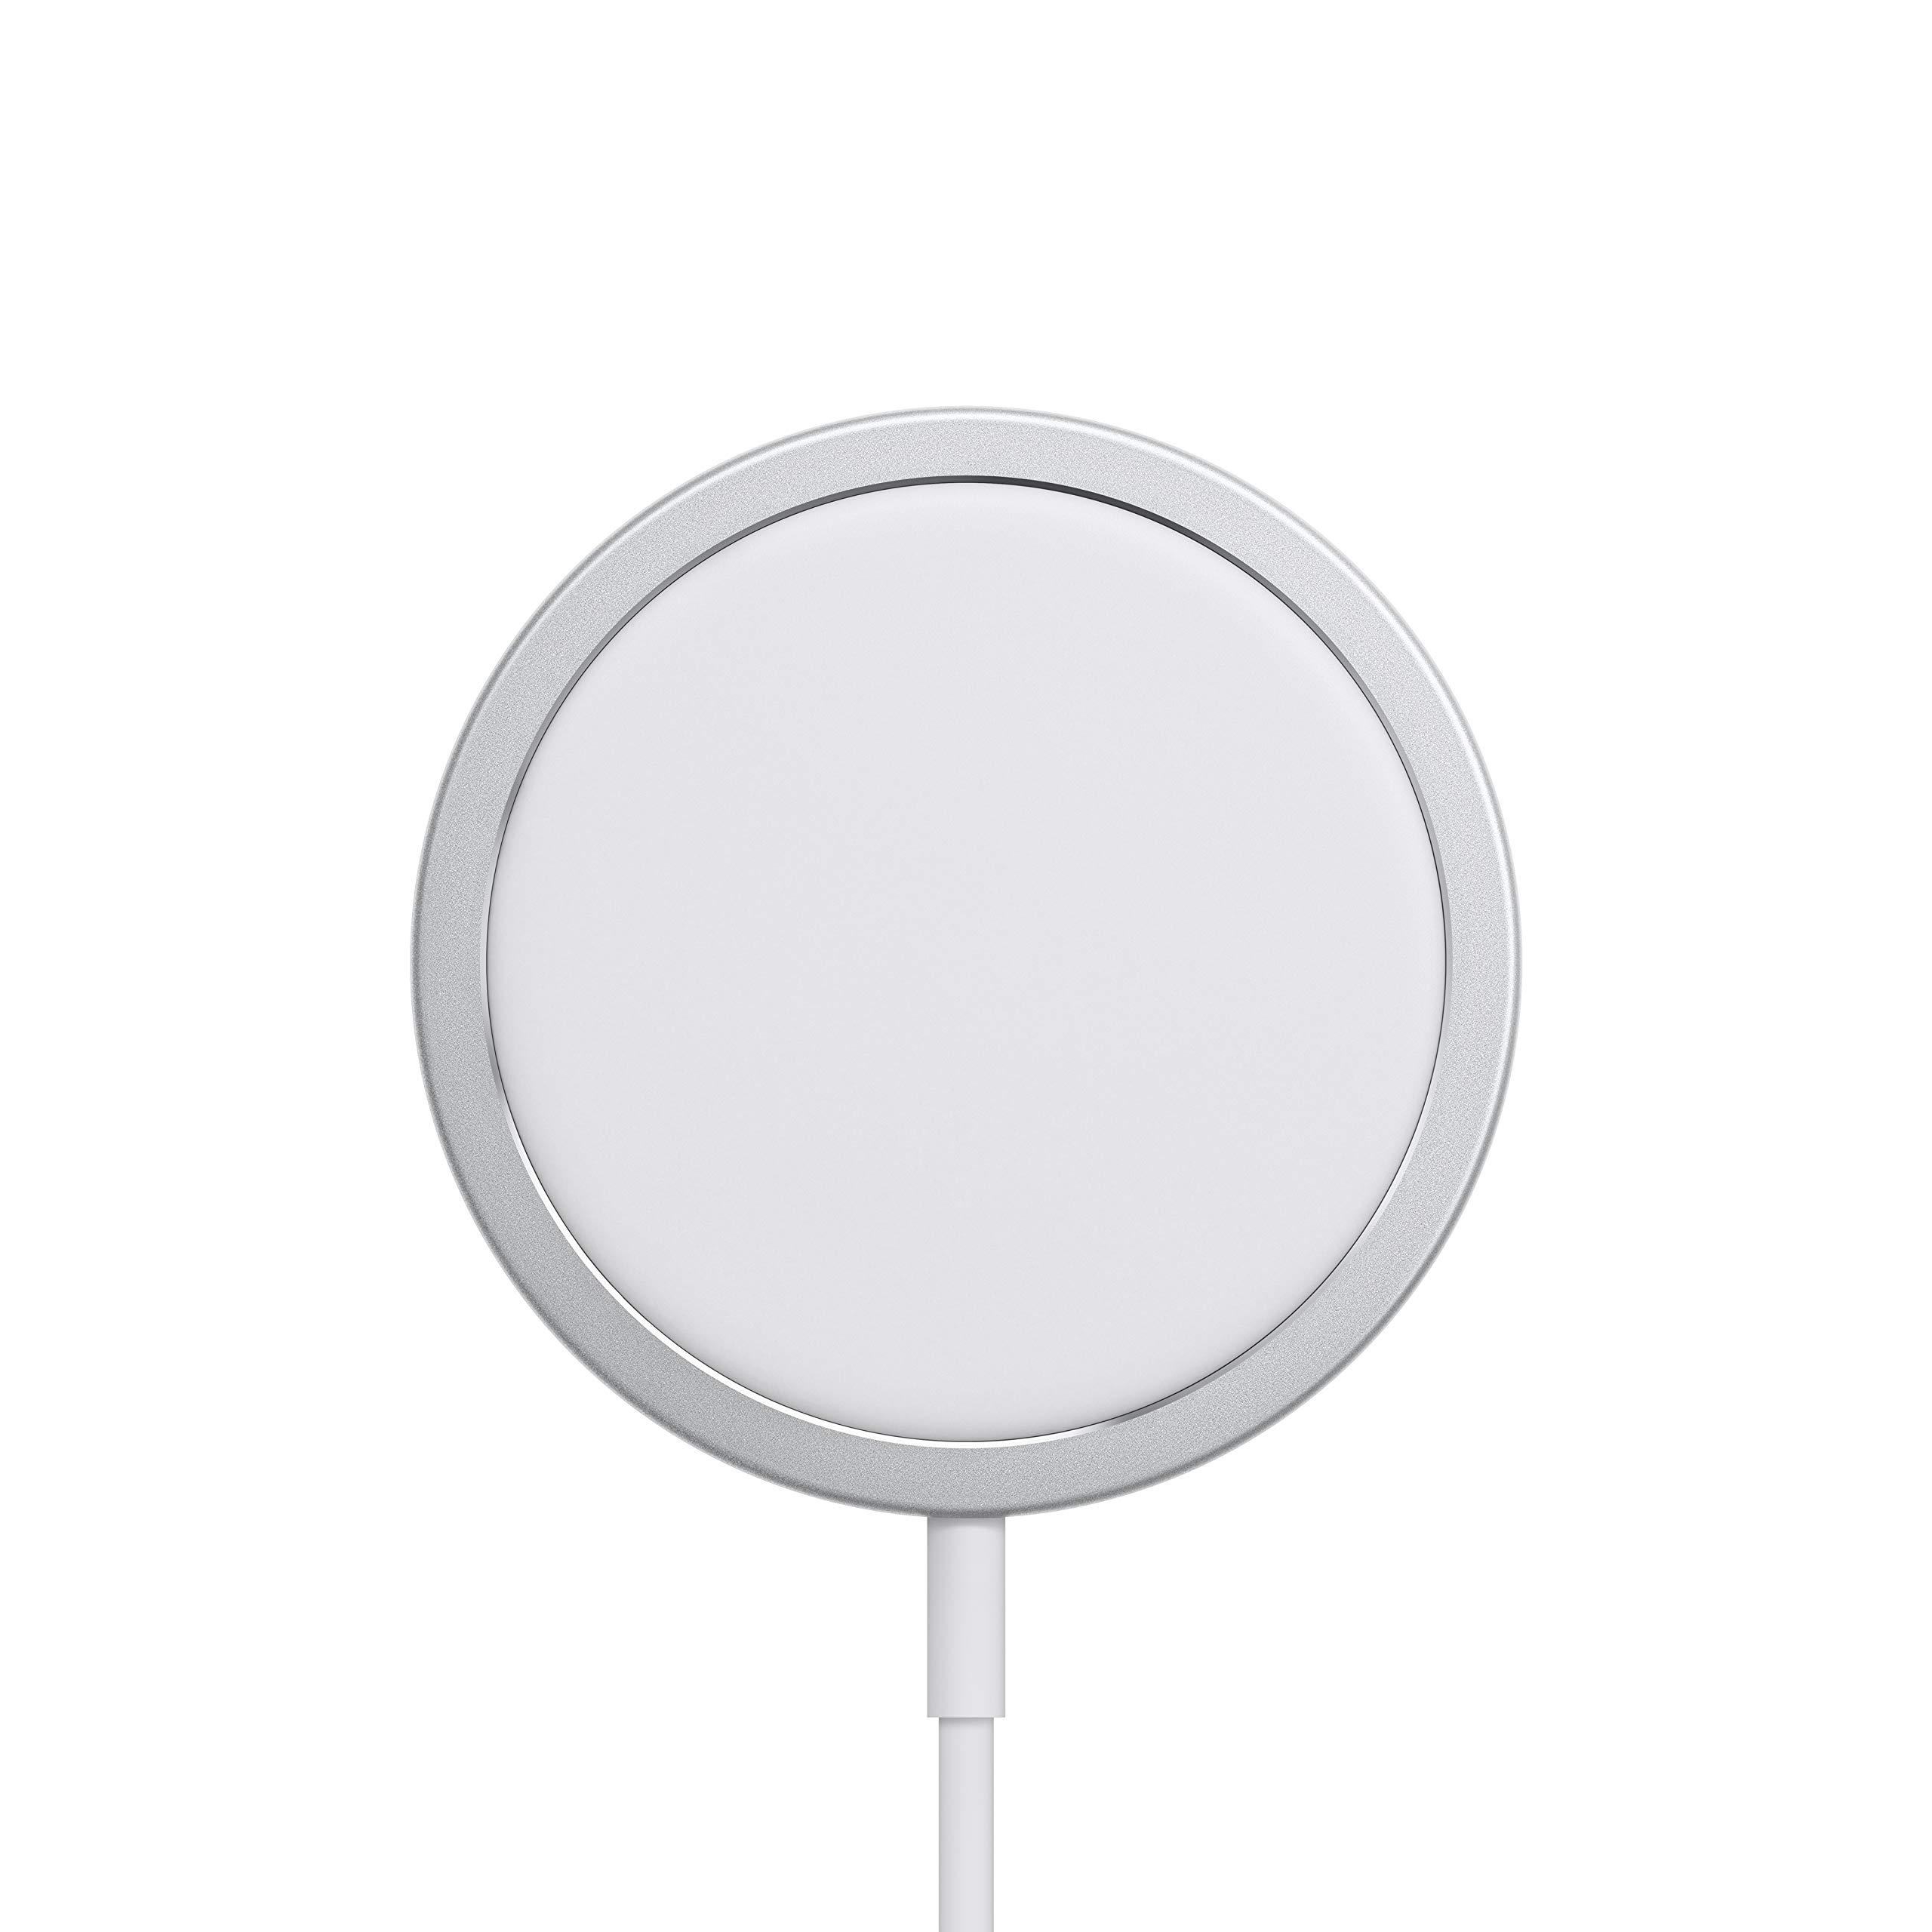 Official Apple MagSafe Charger $33